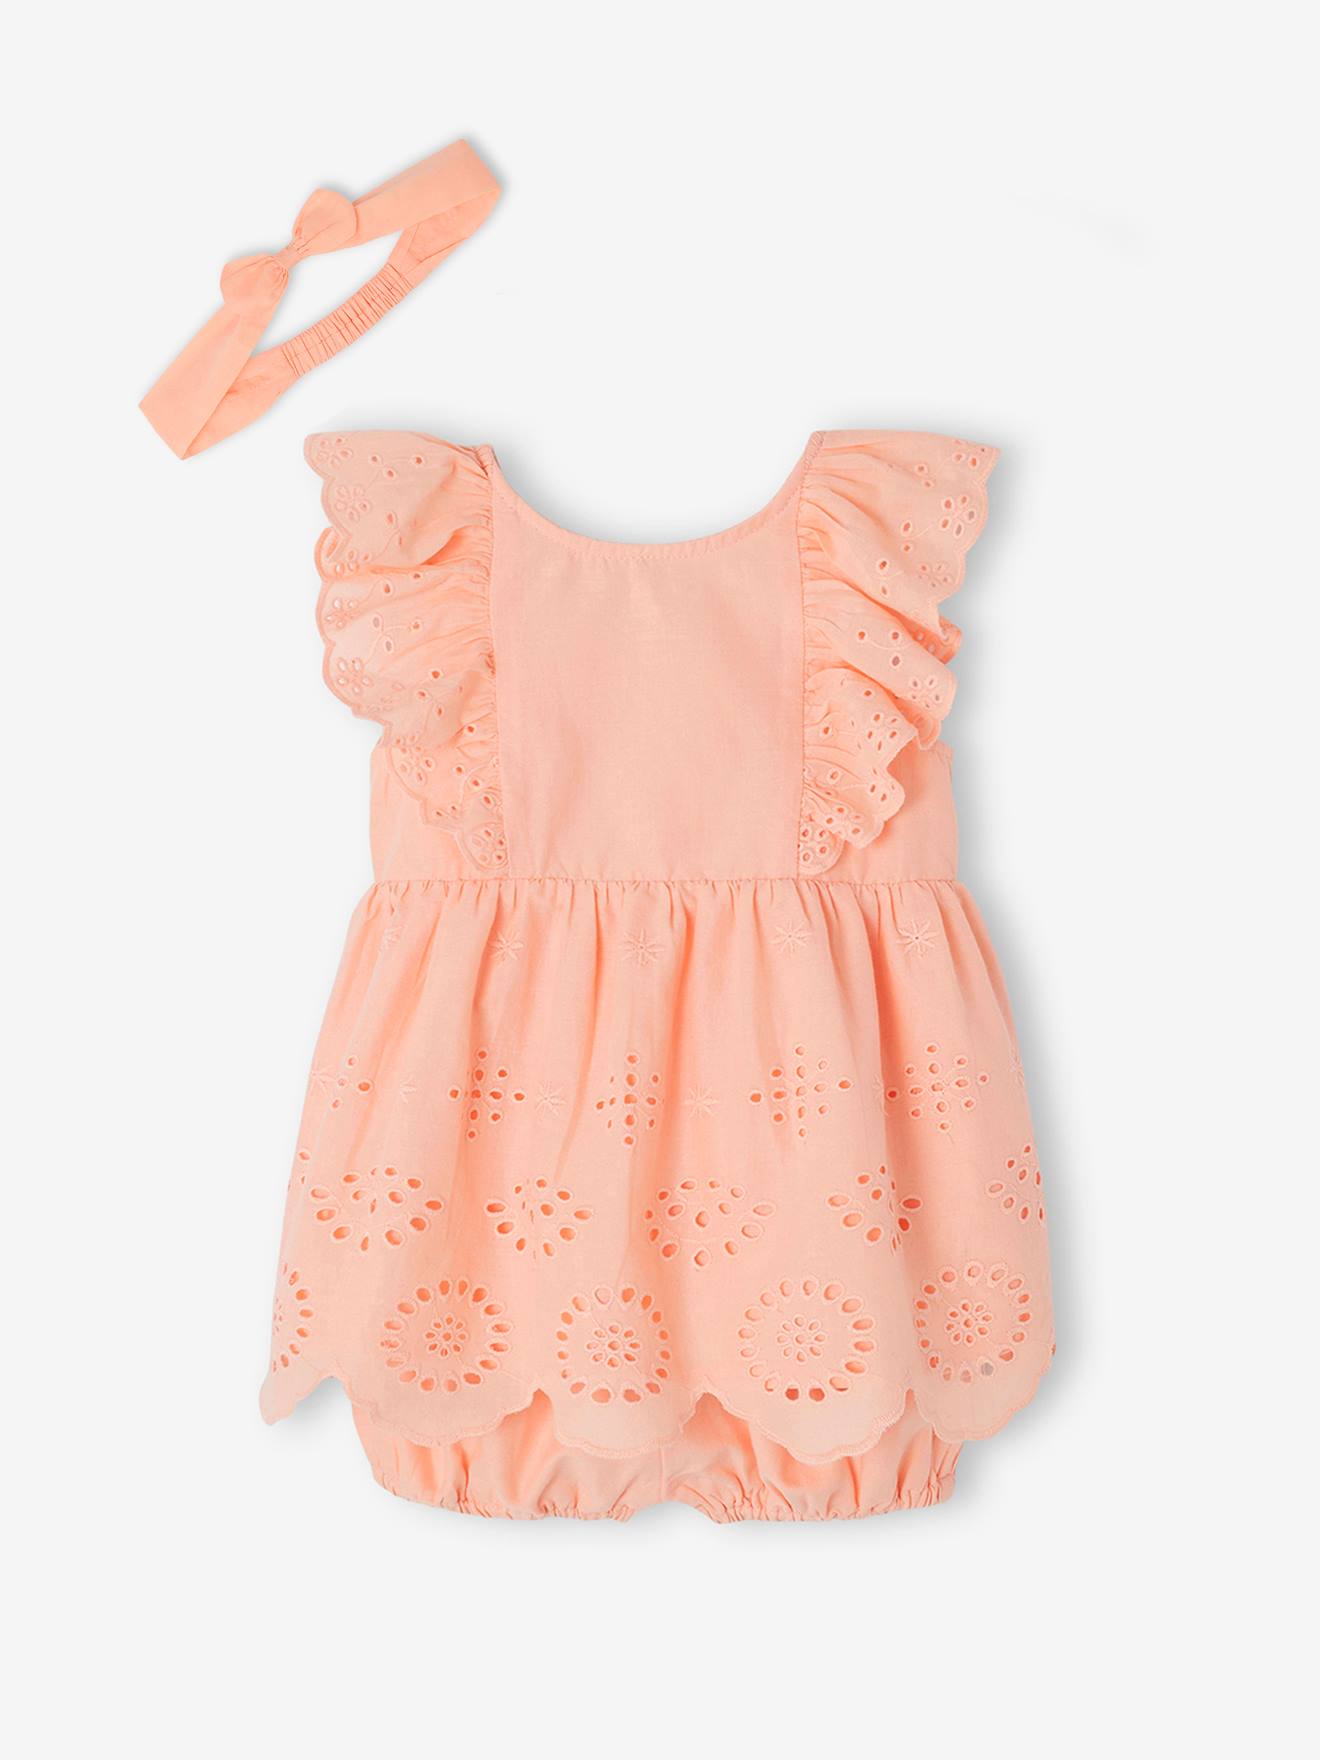 Occasion Wear Outfit for Babies: Dress, Bloomer Shorts & Hairband coral